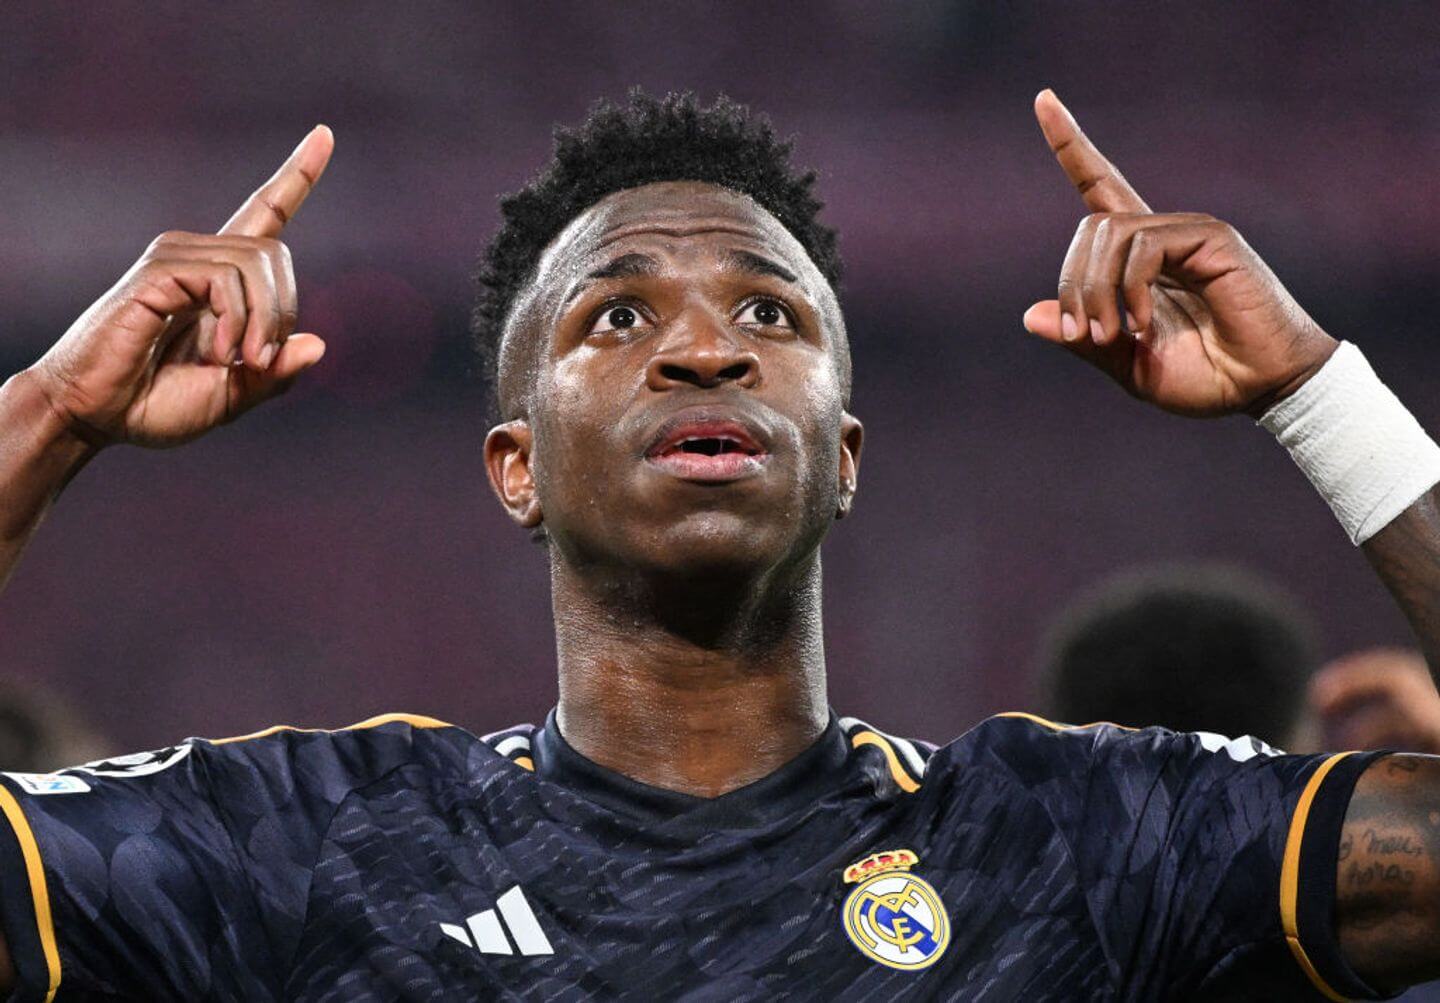 Bayern Munich vs Real Madrid live updates: Vinicius Jr penalty secures 2-2 draw in Champions League semi-final